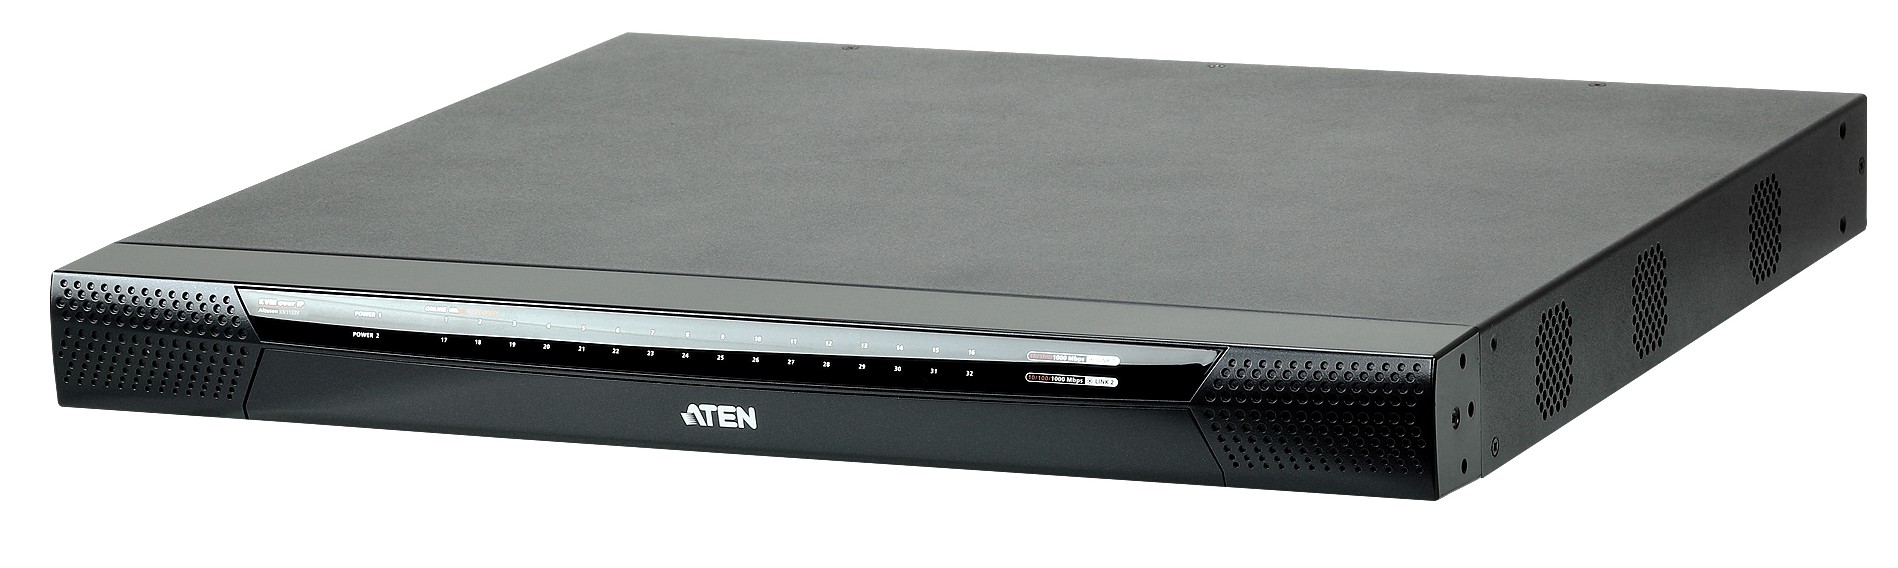 Aten KN1132v KVM Over IP-Switch with 32 Ports and 2 Bus with Audio 